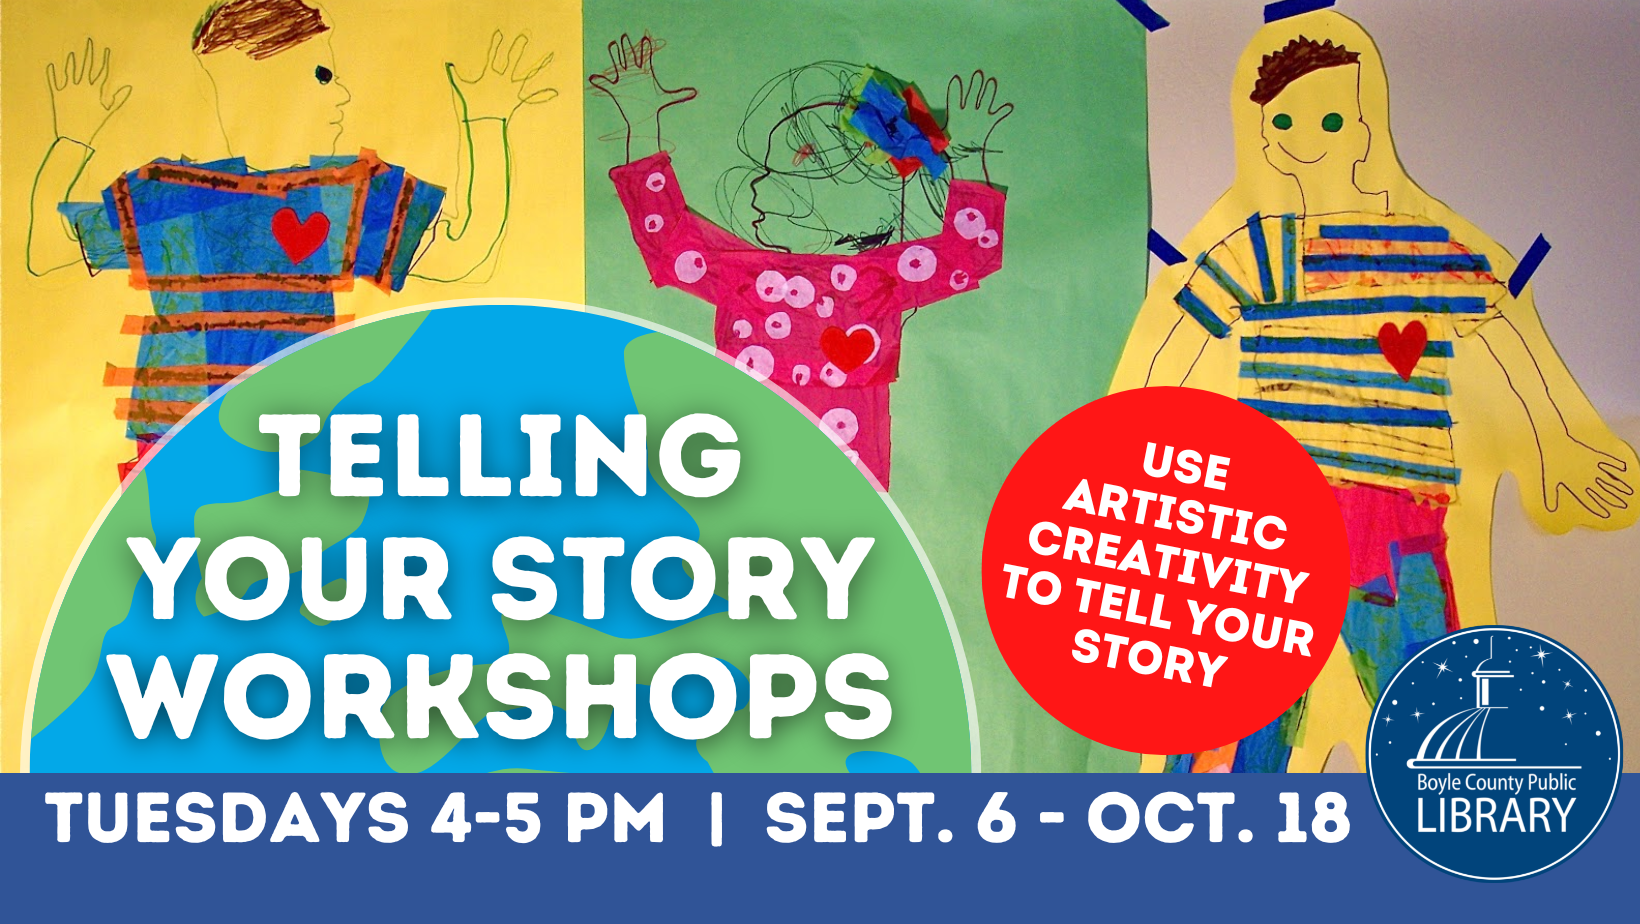 Telling Your Story artistic workshop series